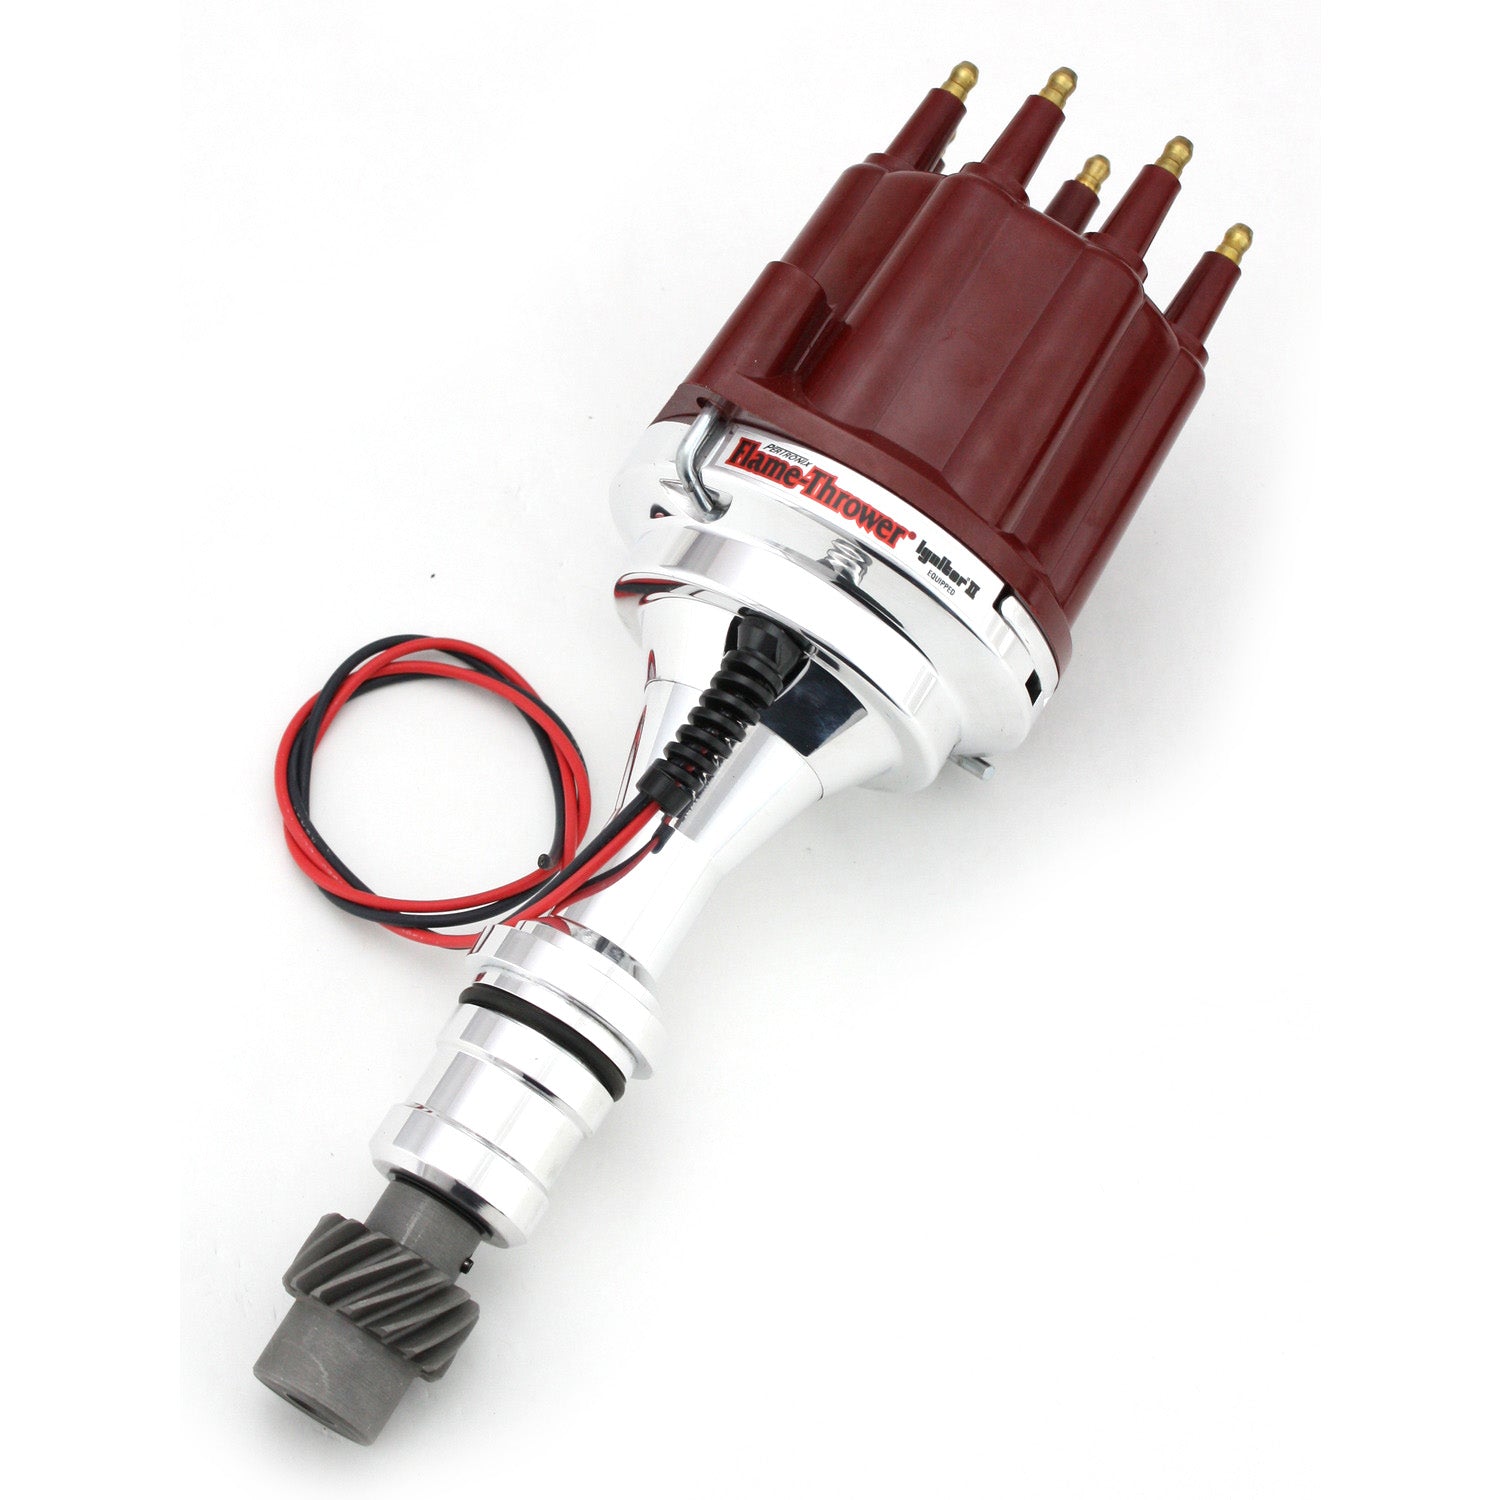 PerTronix D110811 Flame-Thrower Electronic Distributor Billet Oldsmobile V8 Plug and Play with Ignitor II Technology Non Vacuum Advance Red Male Cap